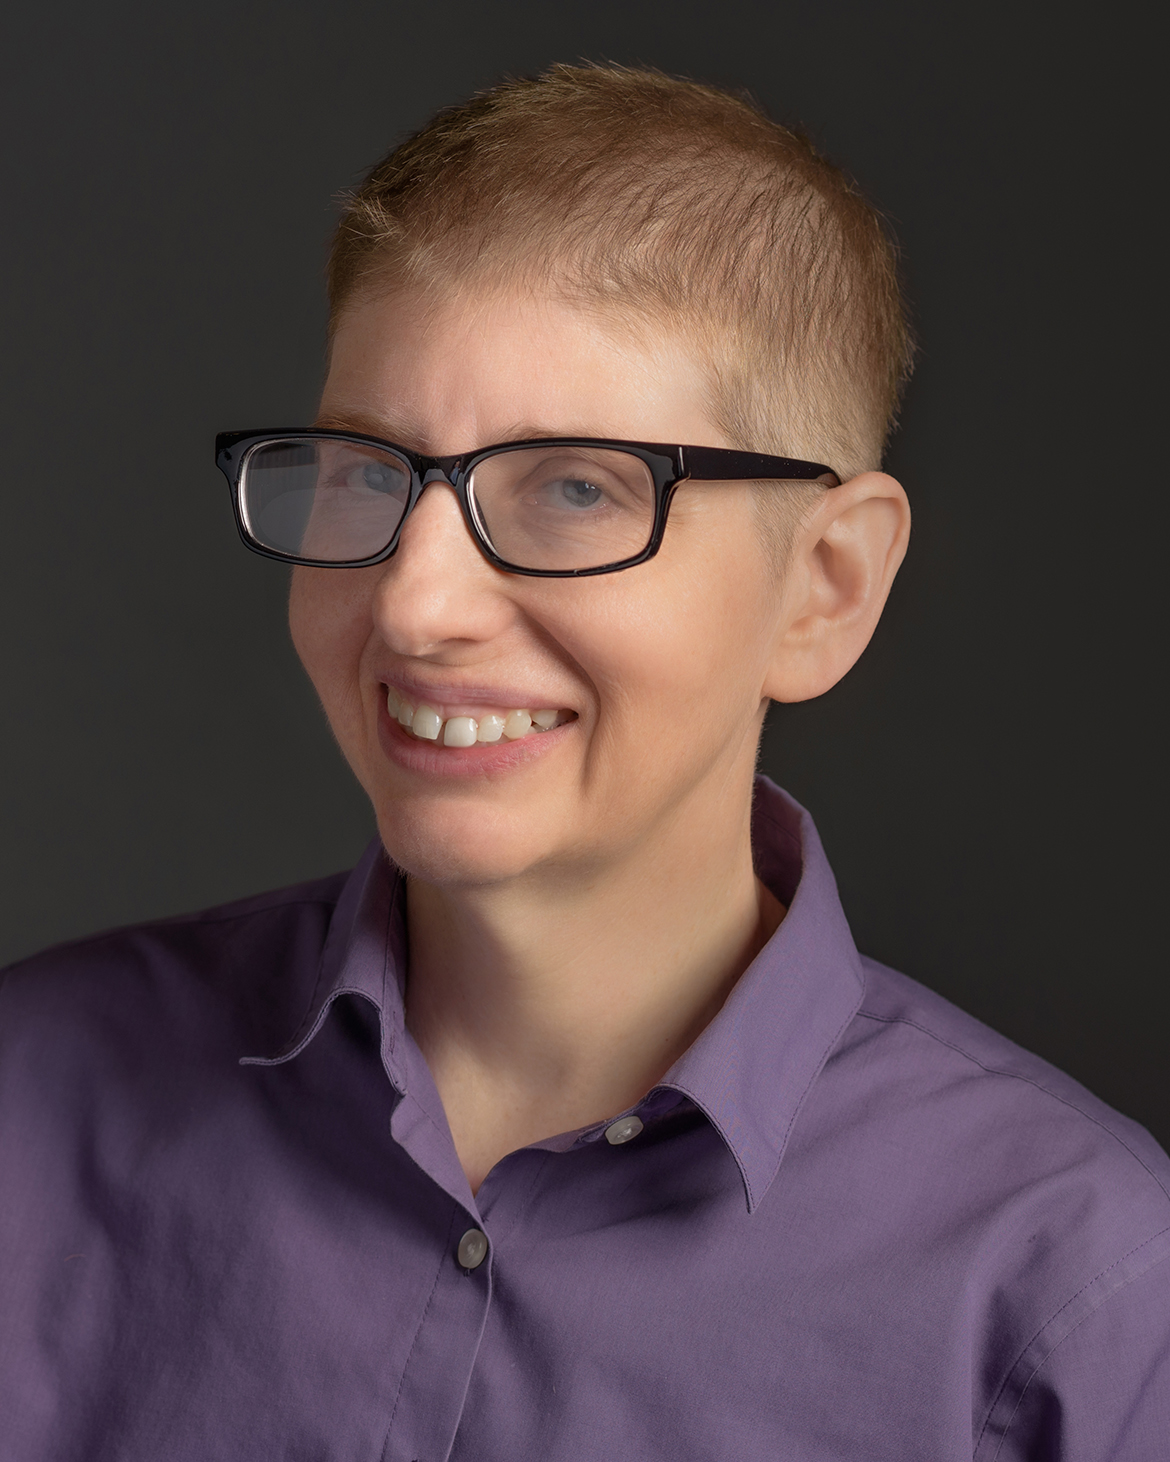 headshot of Laura Morrision, TAG Board member, Treasurer, and 2022 RIAA Honoree. White woman with glasses and short hair, wearing a purple collared shirt